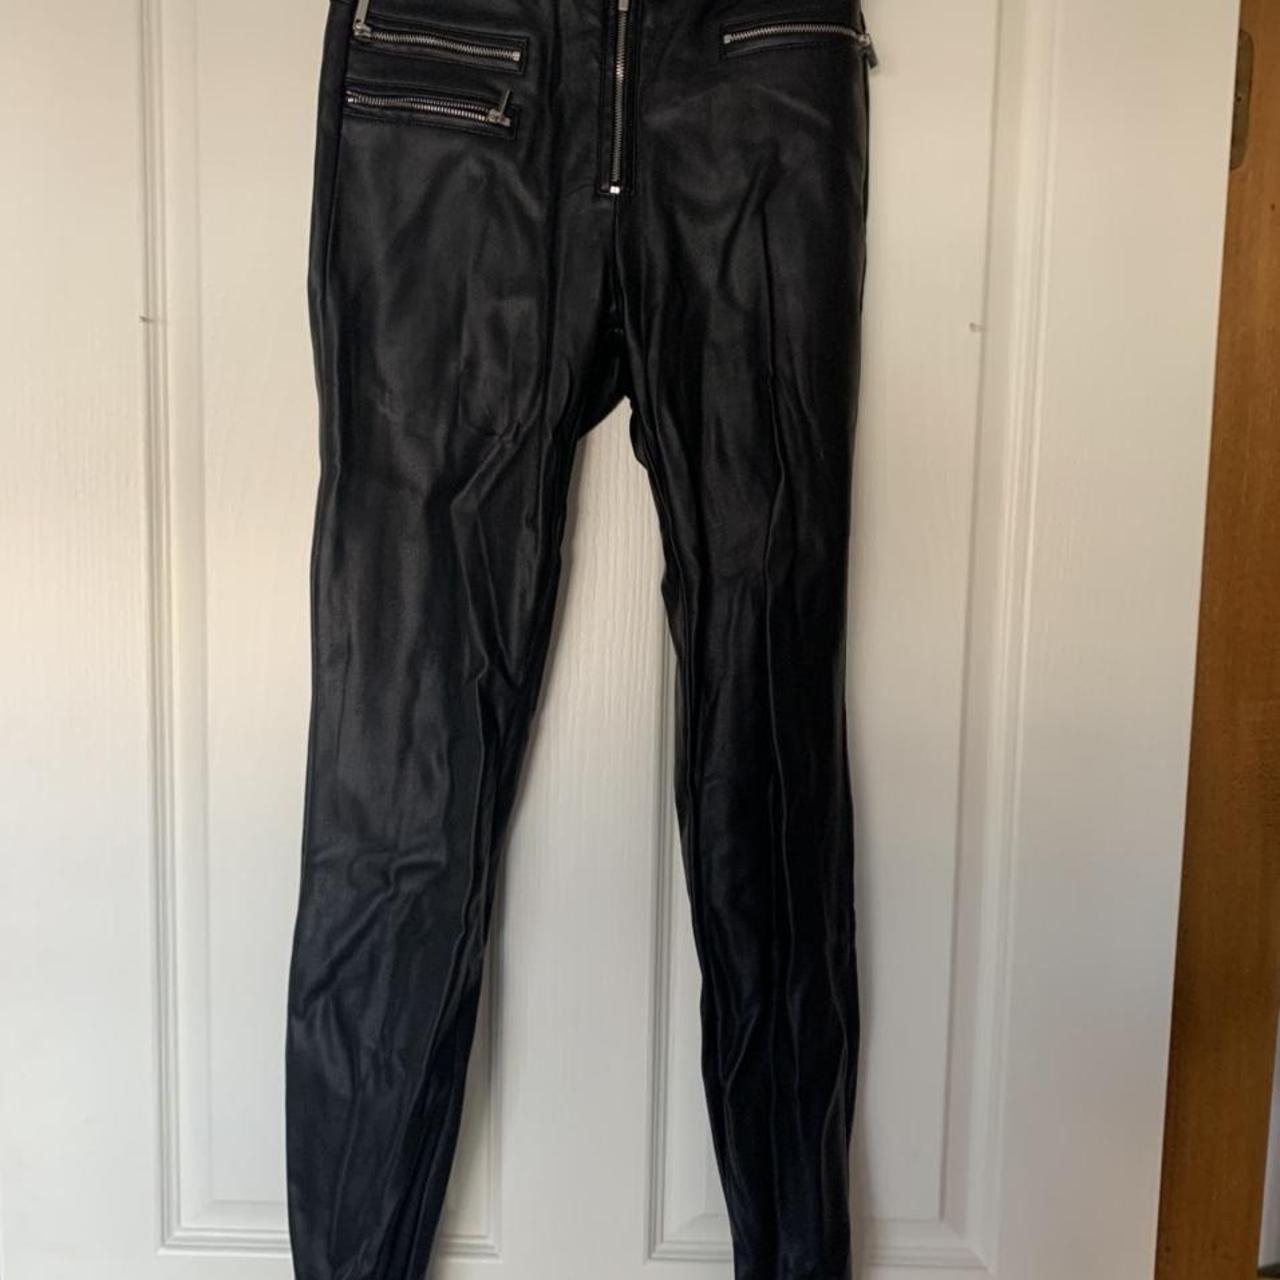 Zara zip up leather pants. Size 6 but could fit a... - Depop